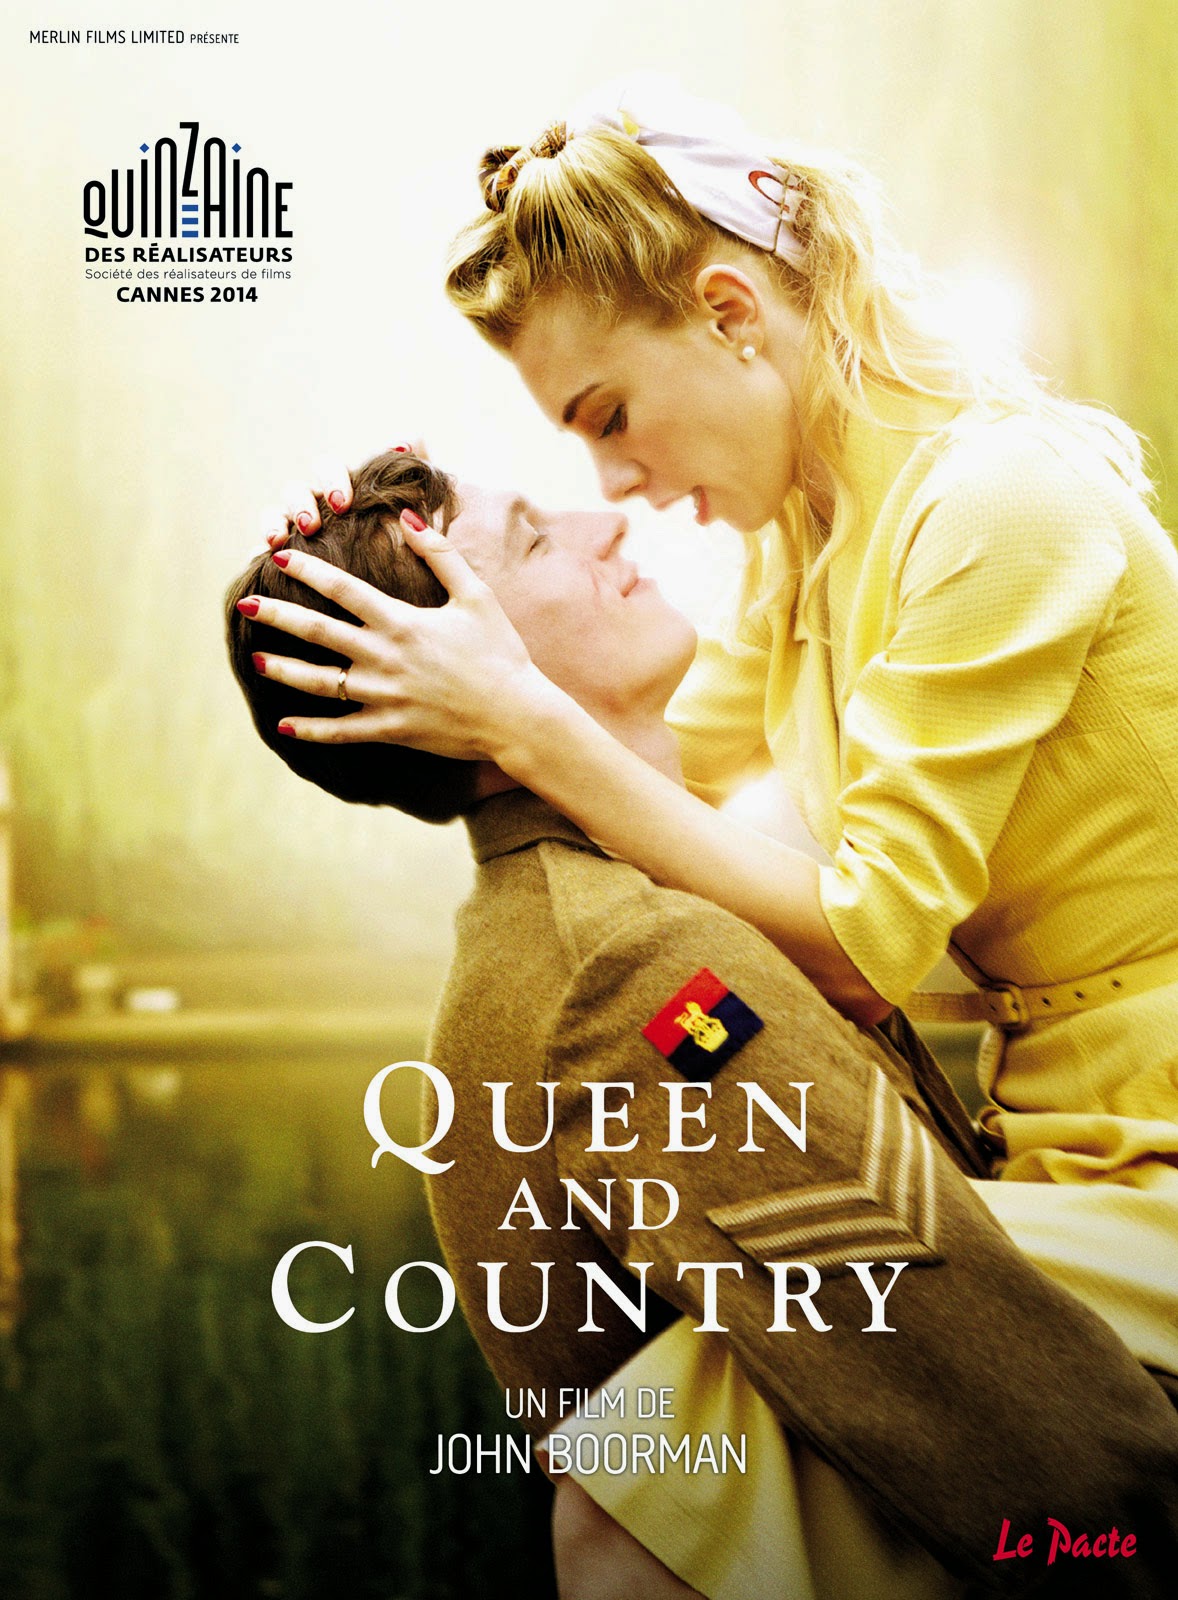 http://fuckingcinephiles.blogspot.fr/2015/01/critique-queen-and-country.html